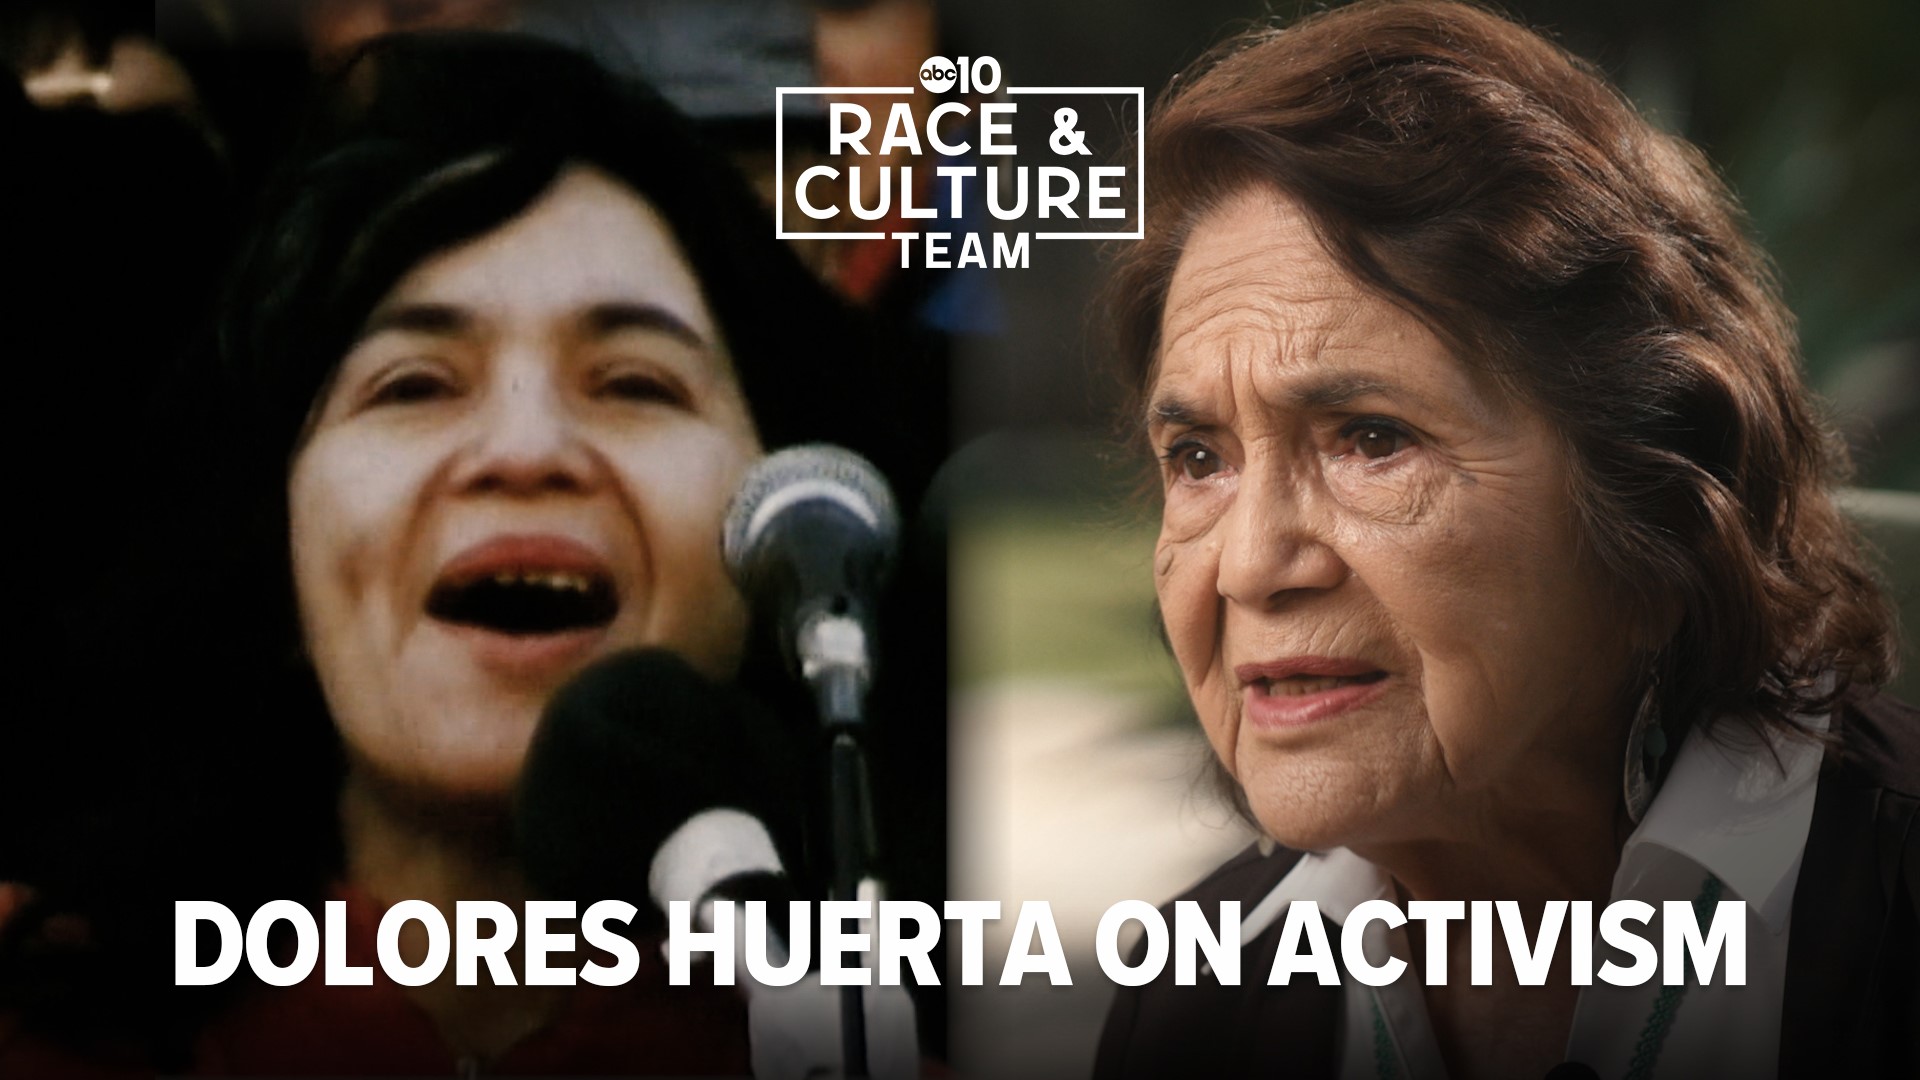 Labor leader Dolores Huerta devoted her life to fighting for farmworkers' rights. Now, she's taking on today's issues through the Dolores Huerta Foundation.